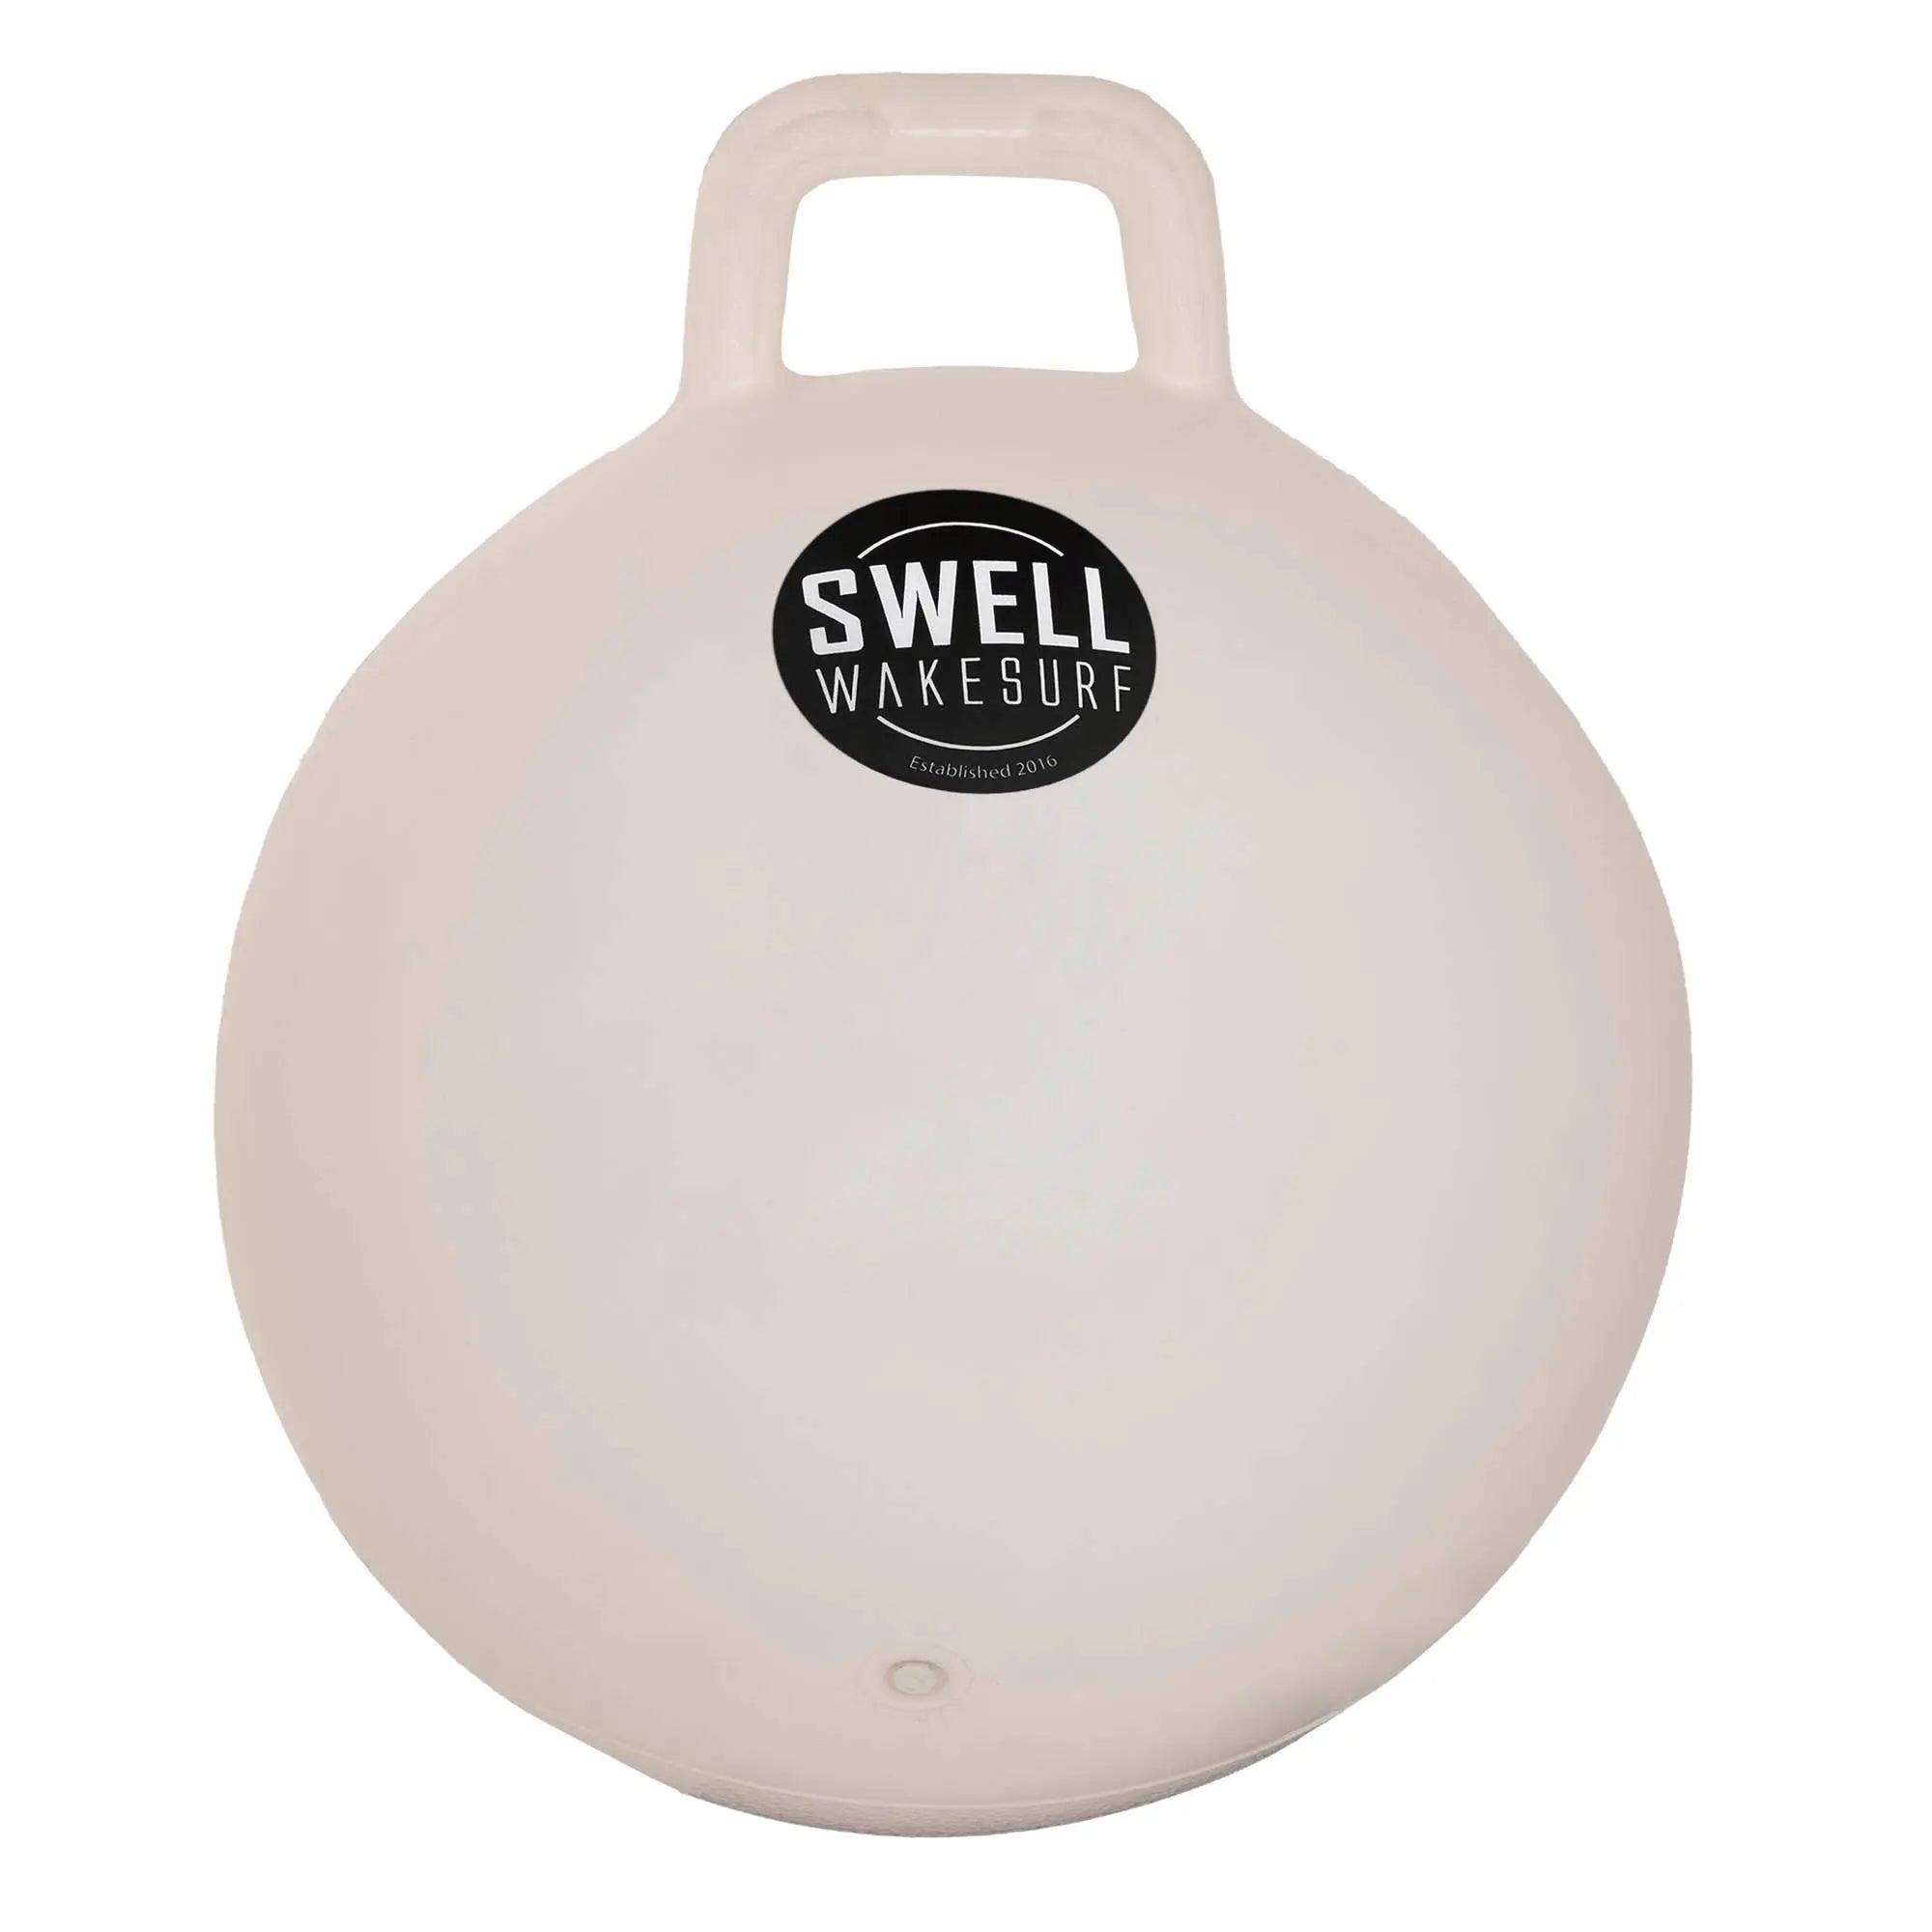 SWELL Wakesurf - Original Buoy Ball Inflatable Bumper - Great For Tie-ups